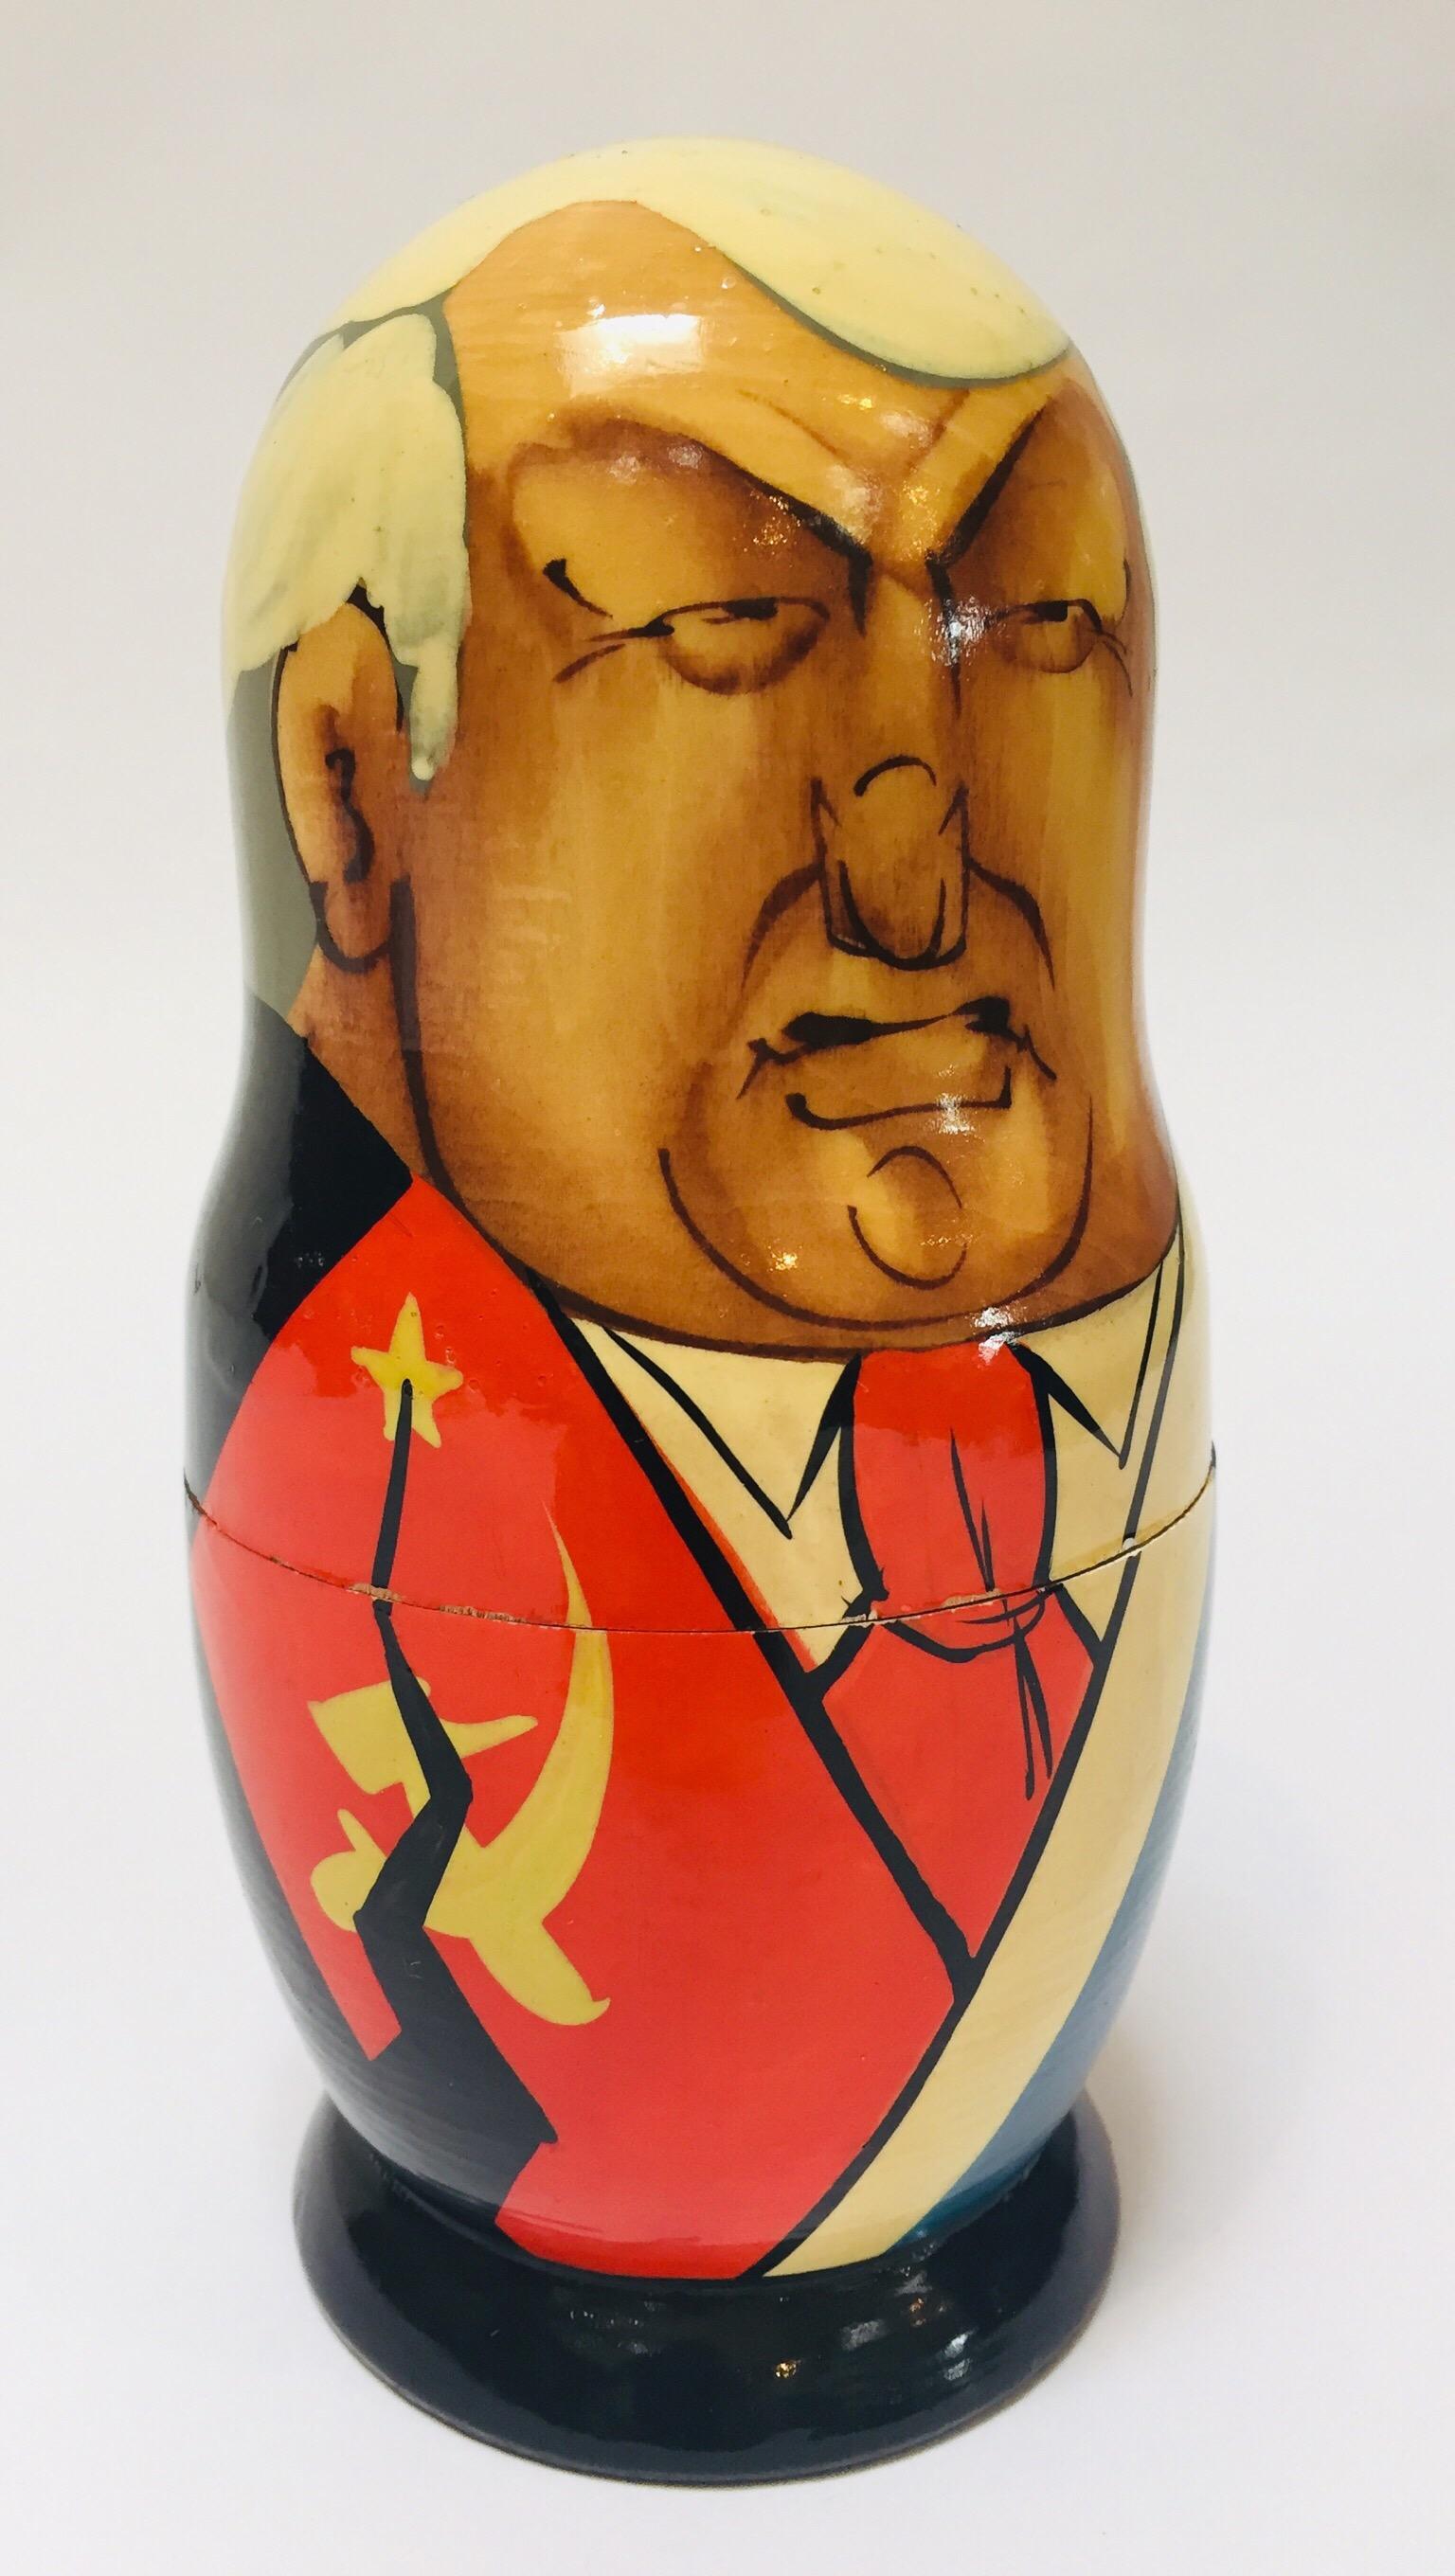 Beech Hand Painted and Carved Nesting Matryoshka Soviet Politicians USSR, 1990s